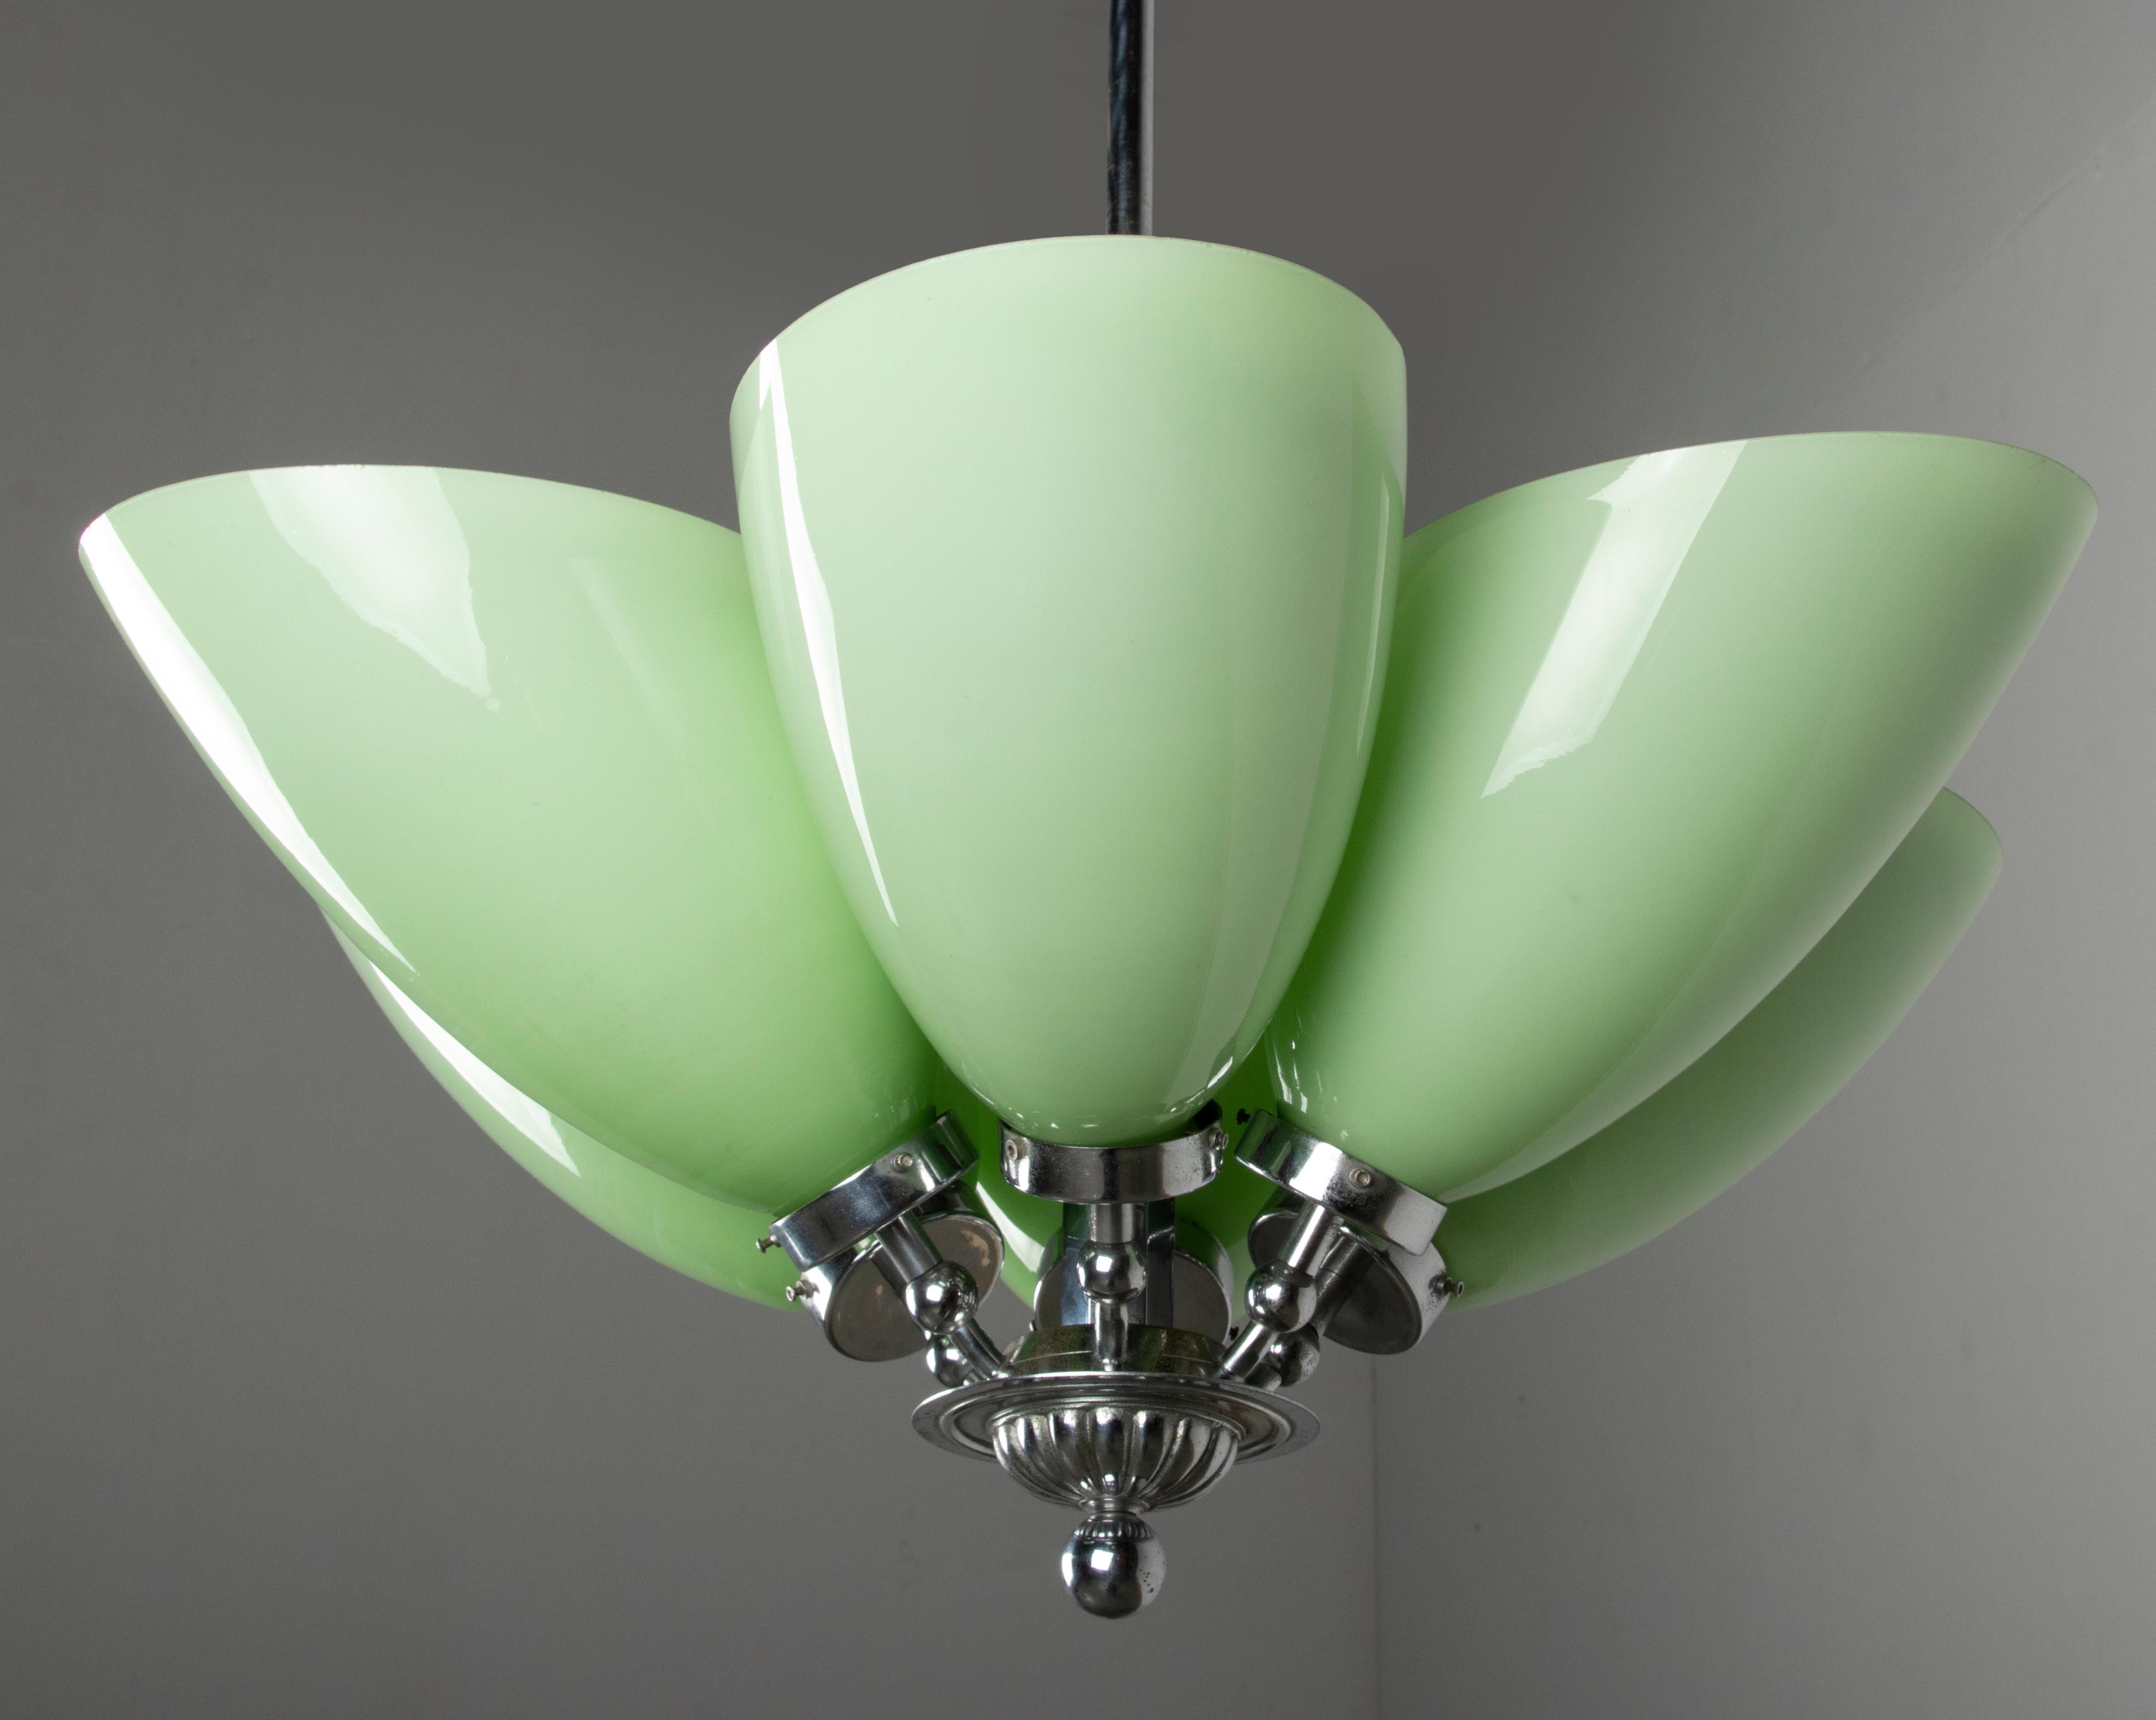 Early 20th Century Crome-Plated Art Deco Chandelier For Sale 10